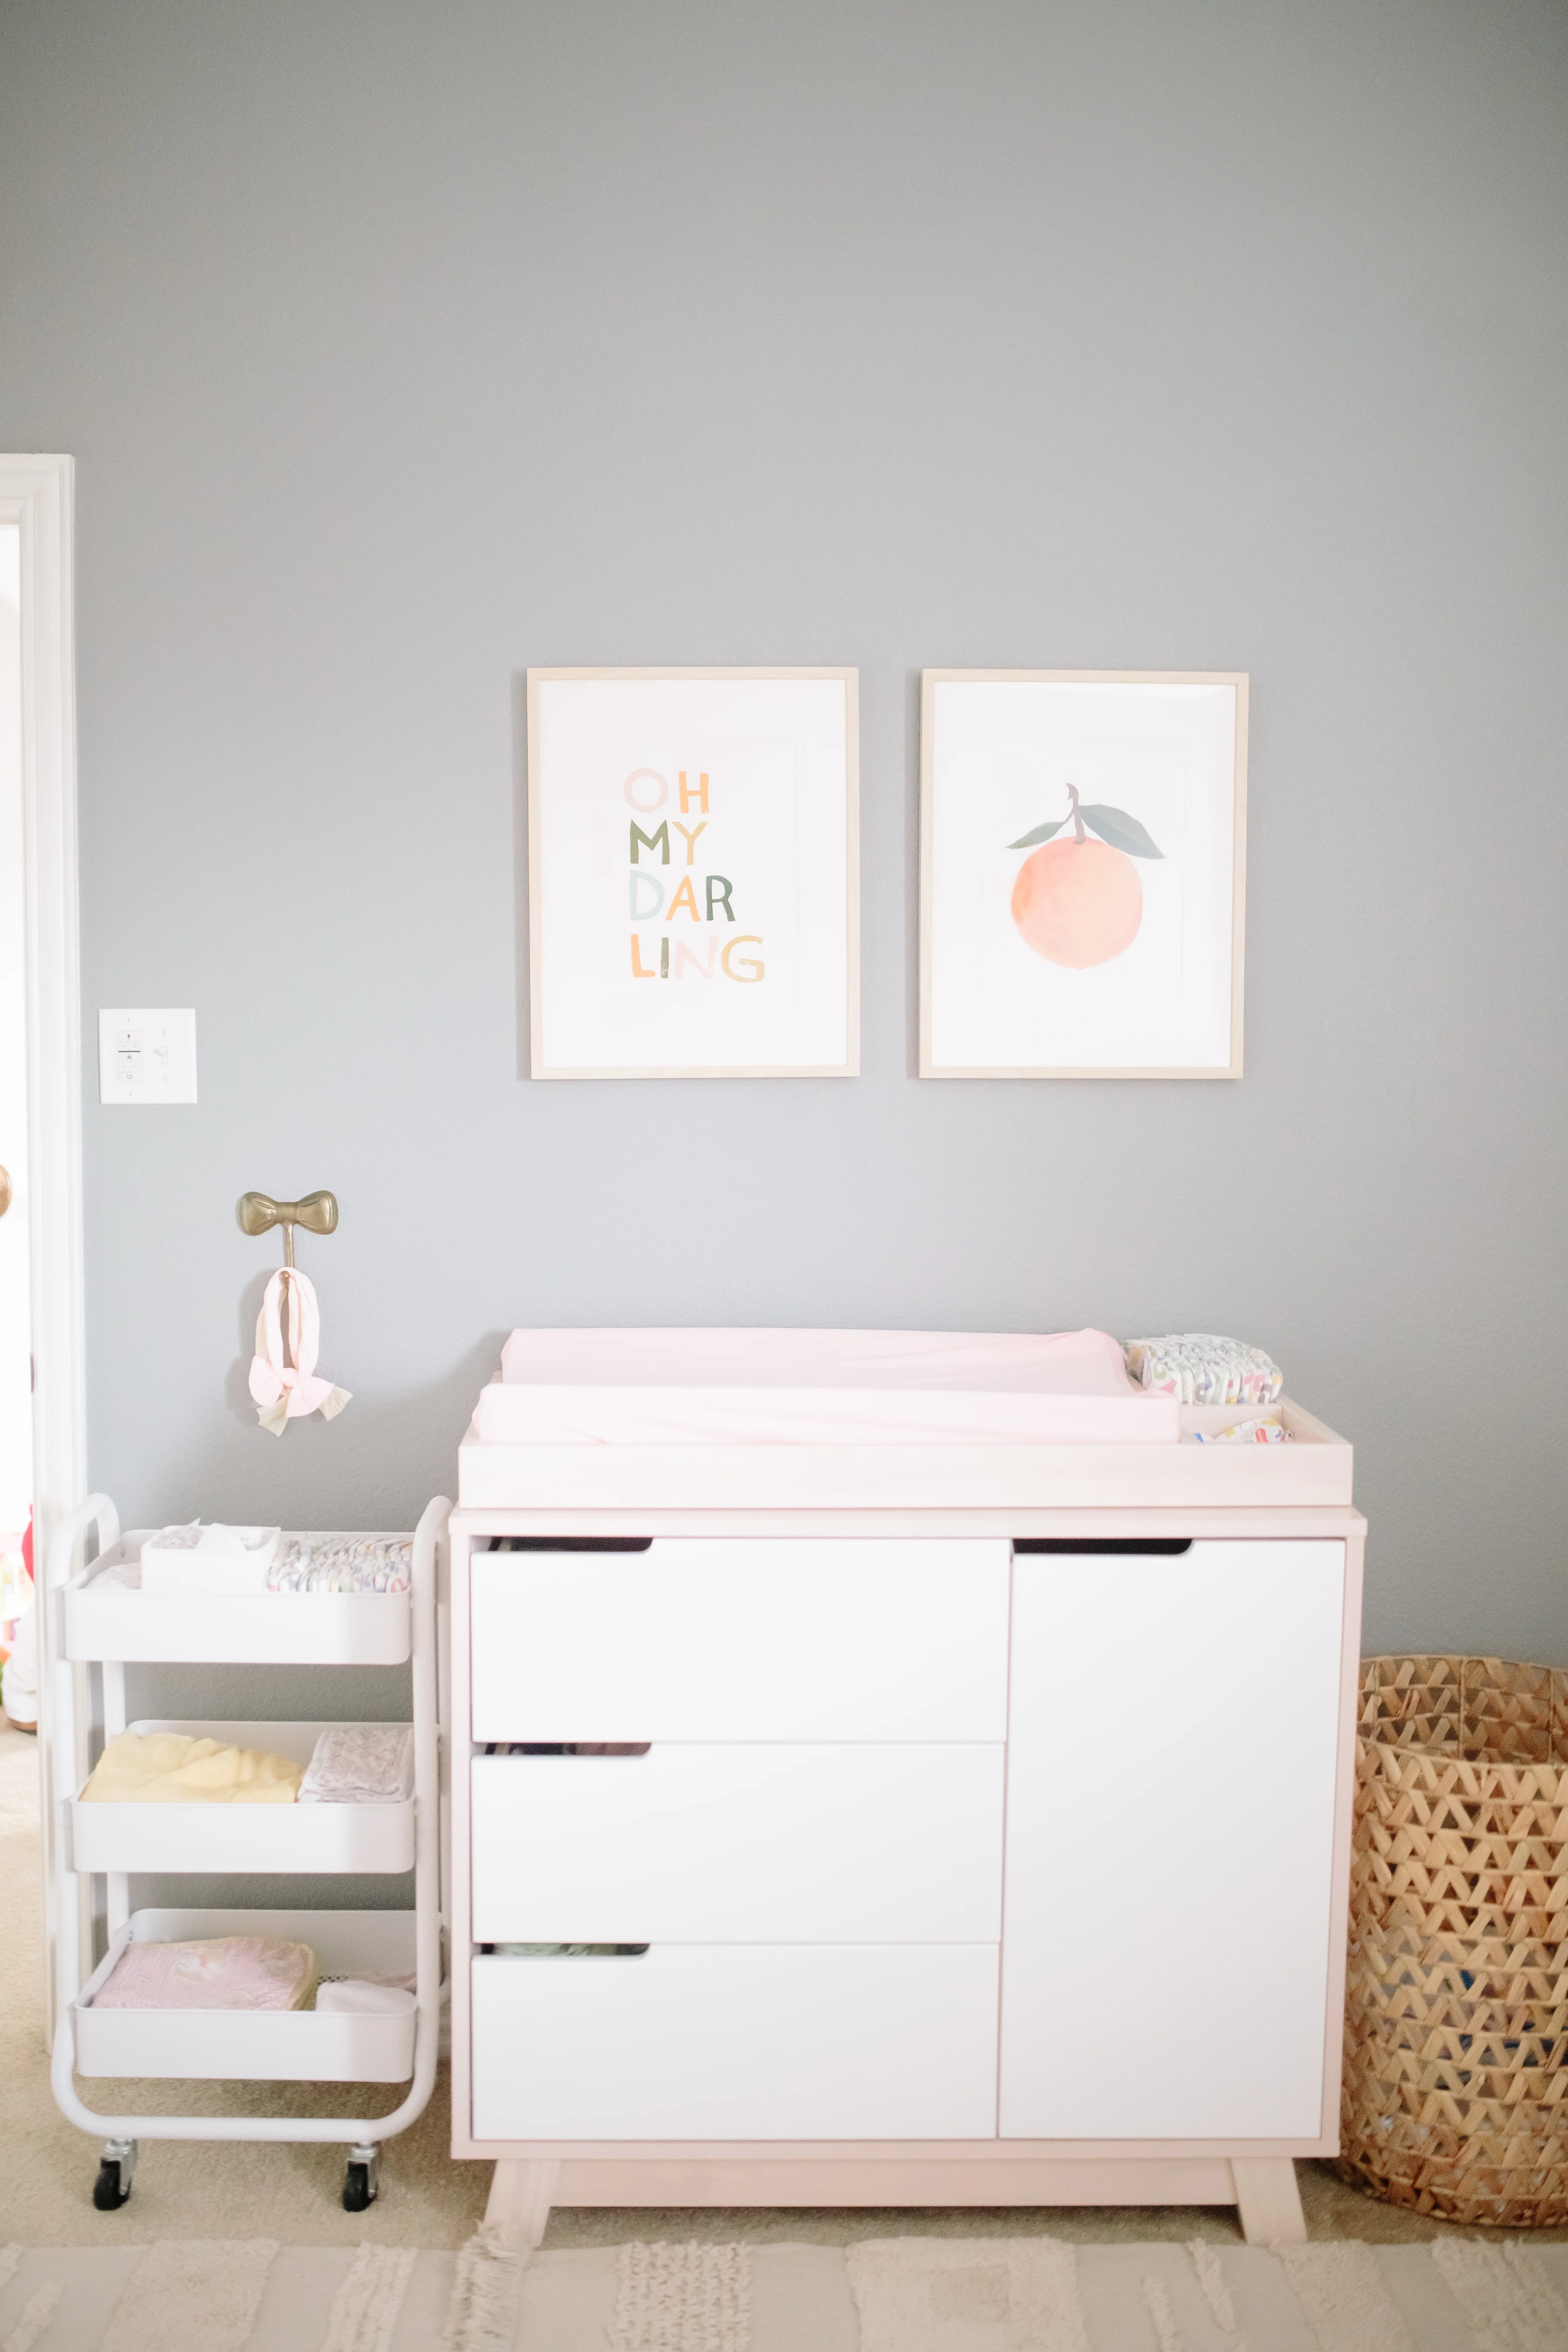 Citrus Art Print Above Nursery Changing Table with Rolling Cart for Diaper Organization